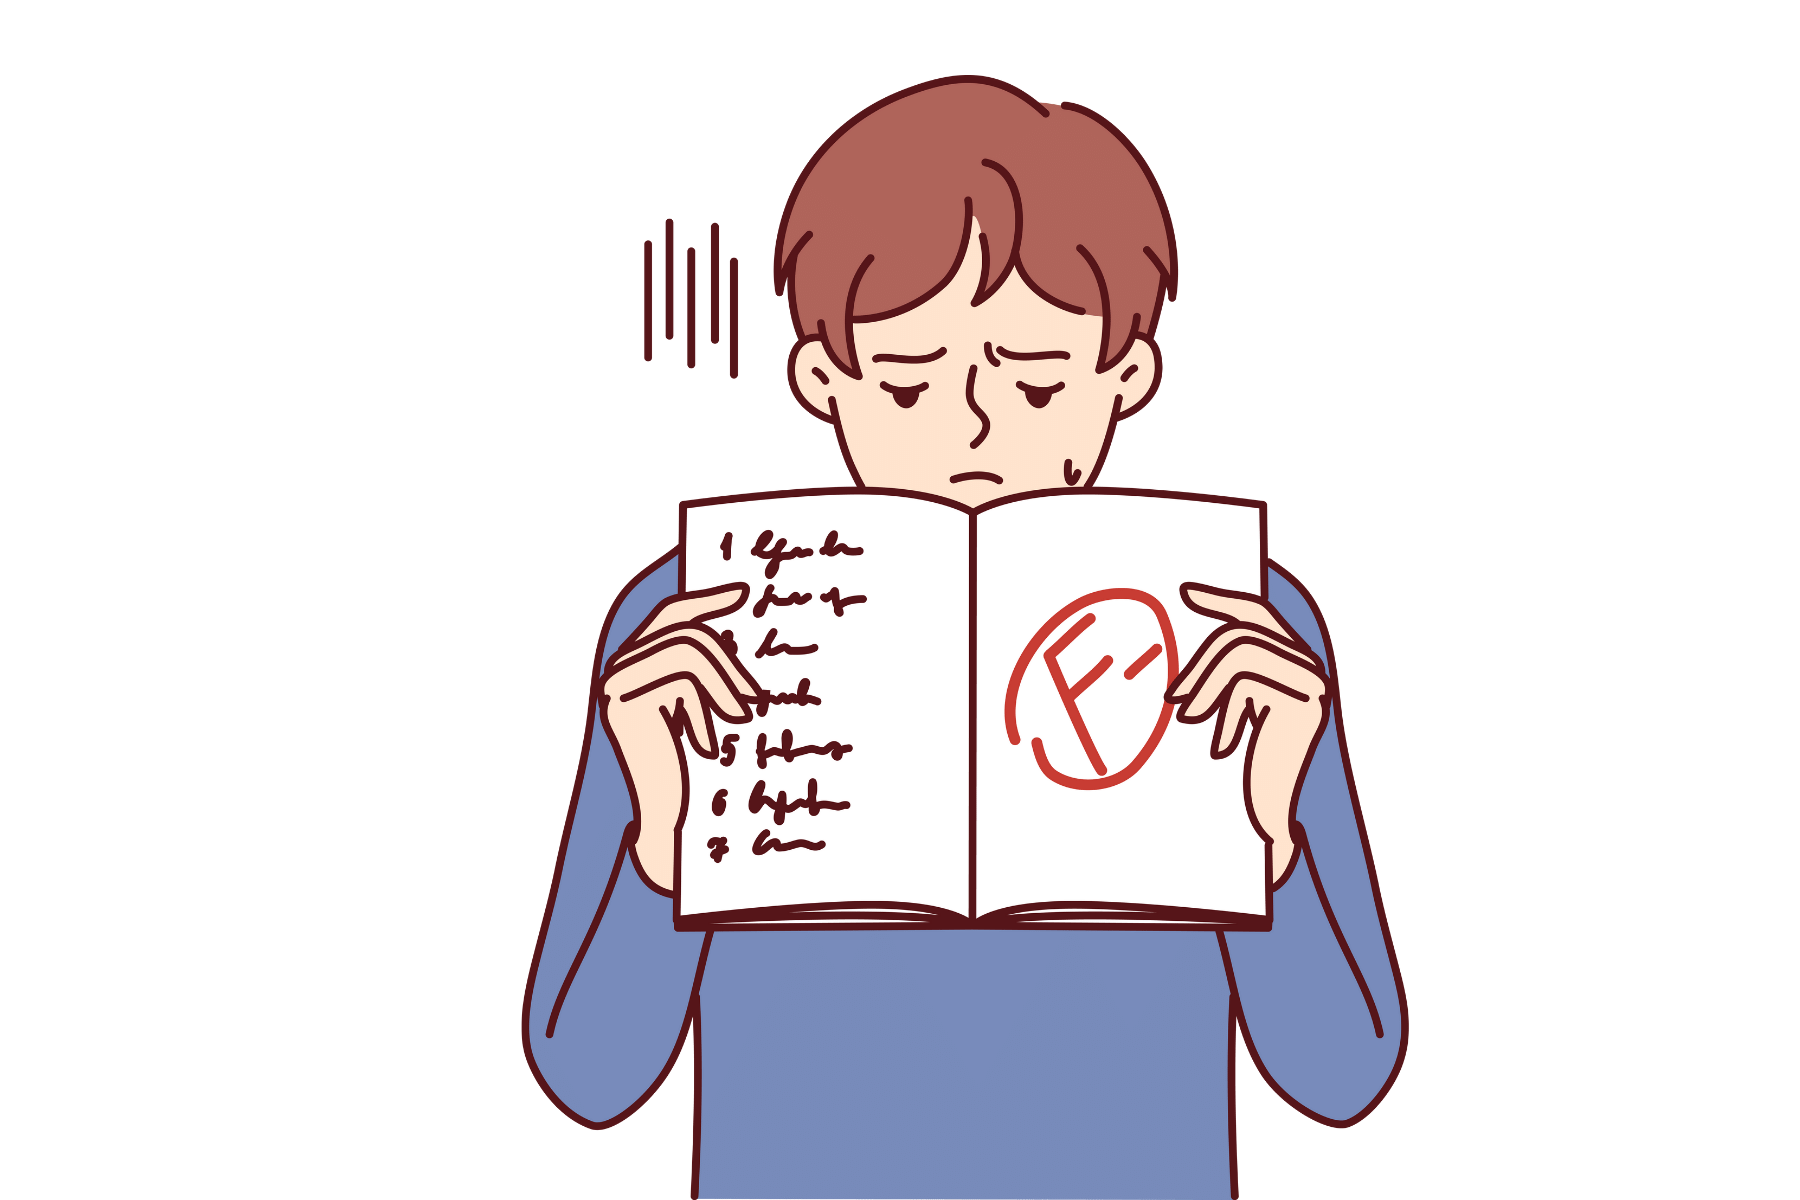 photo of a cartoon college student holding a report card with an F on it.